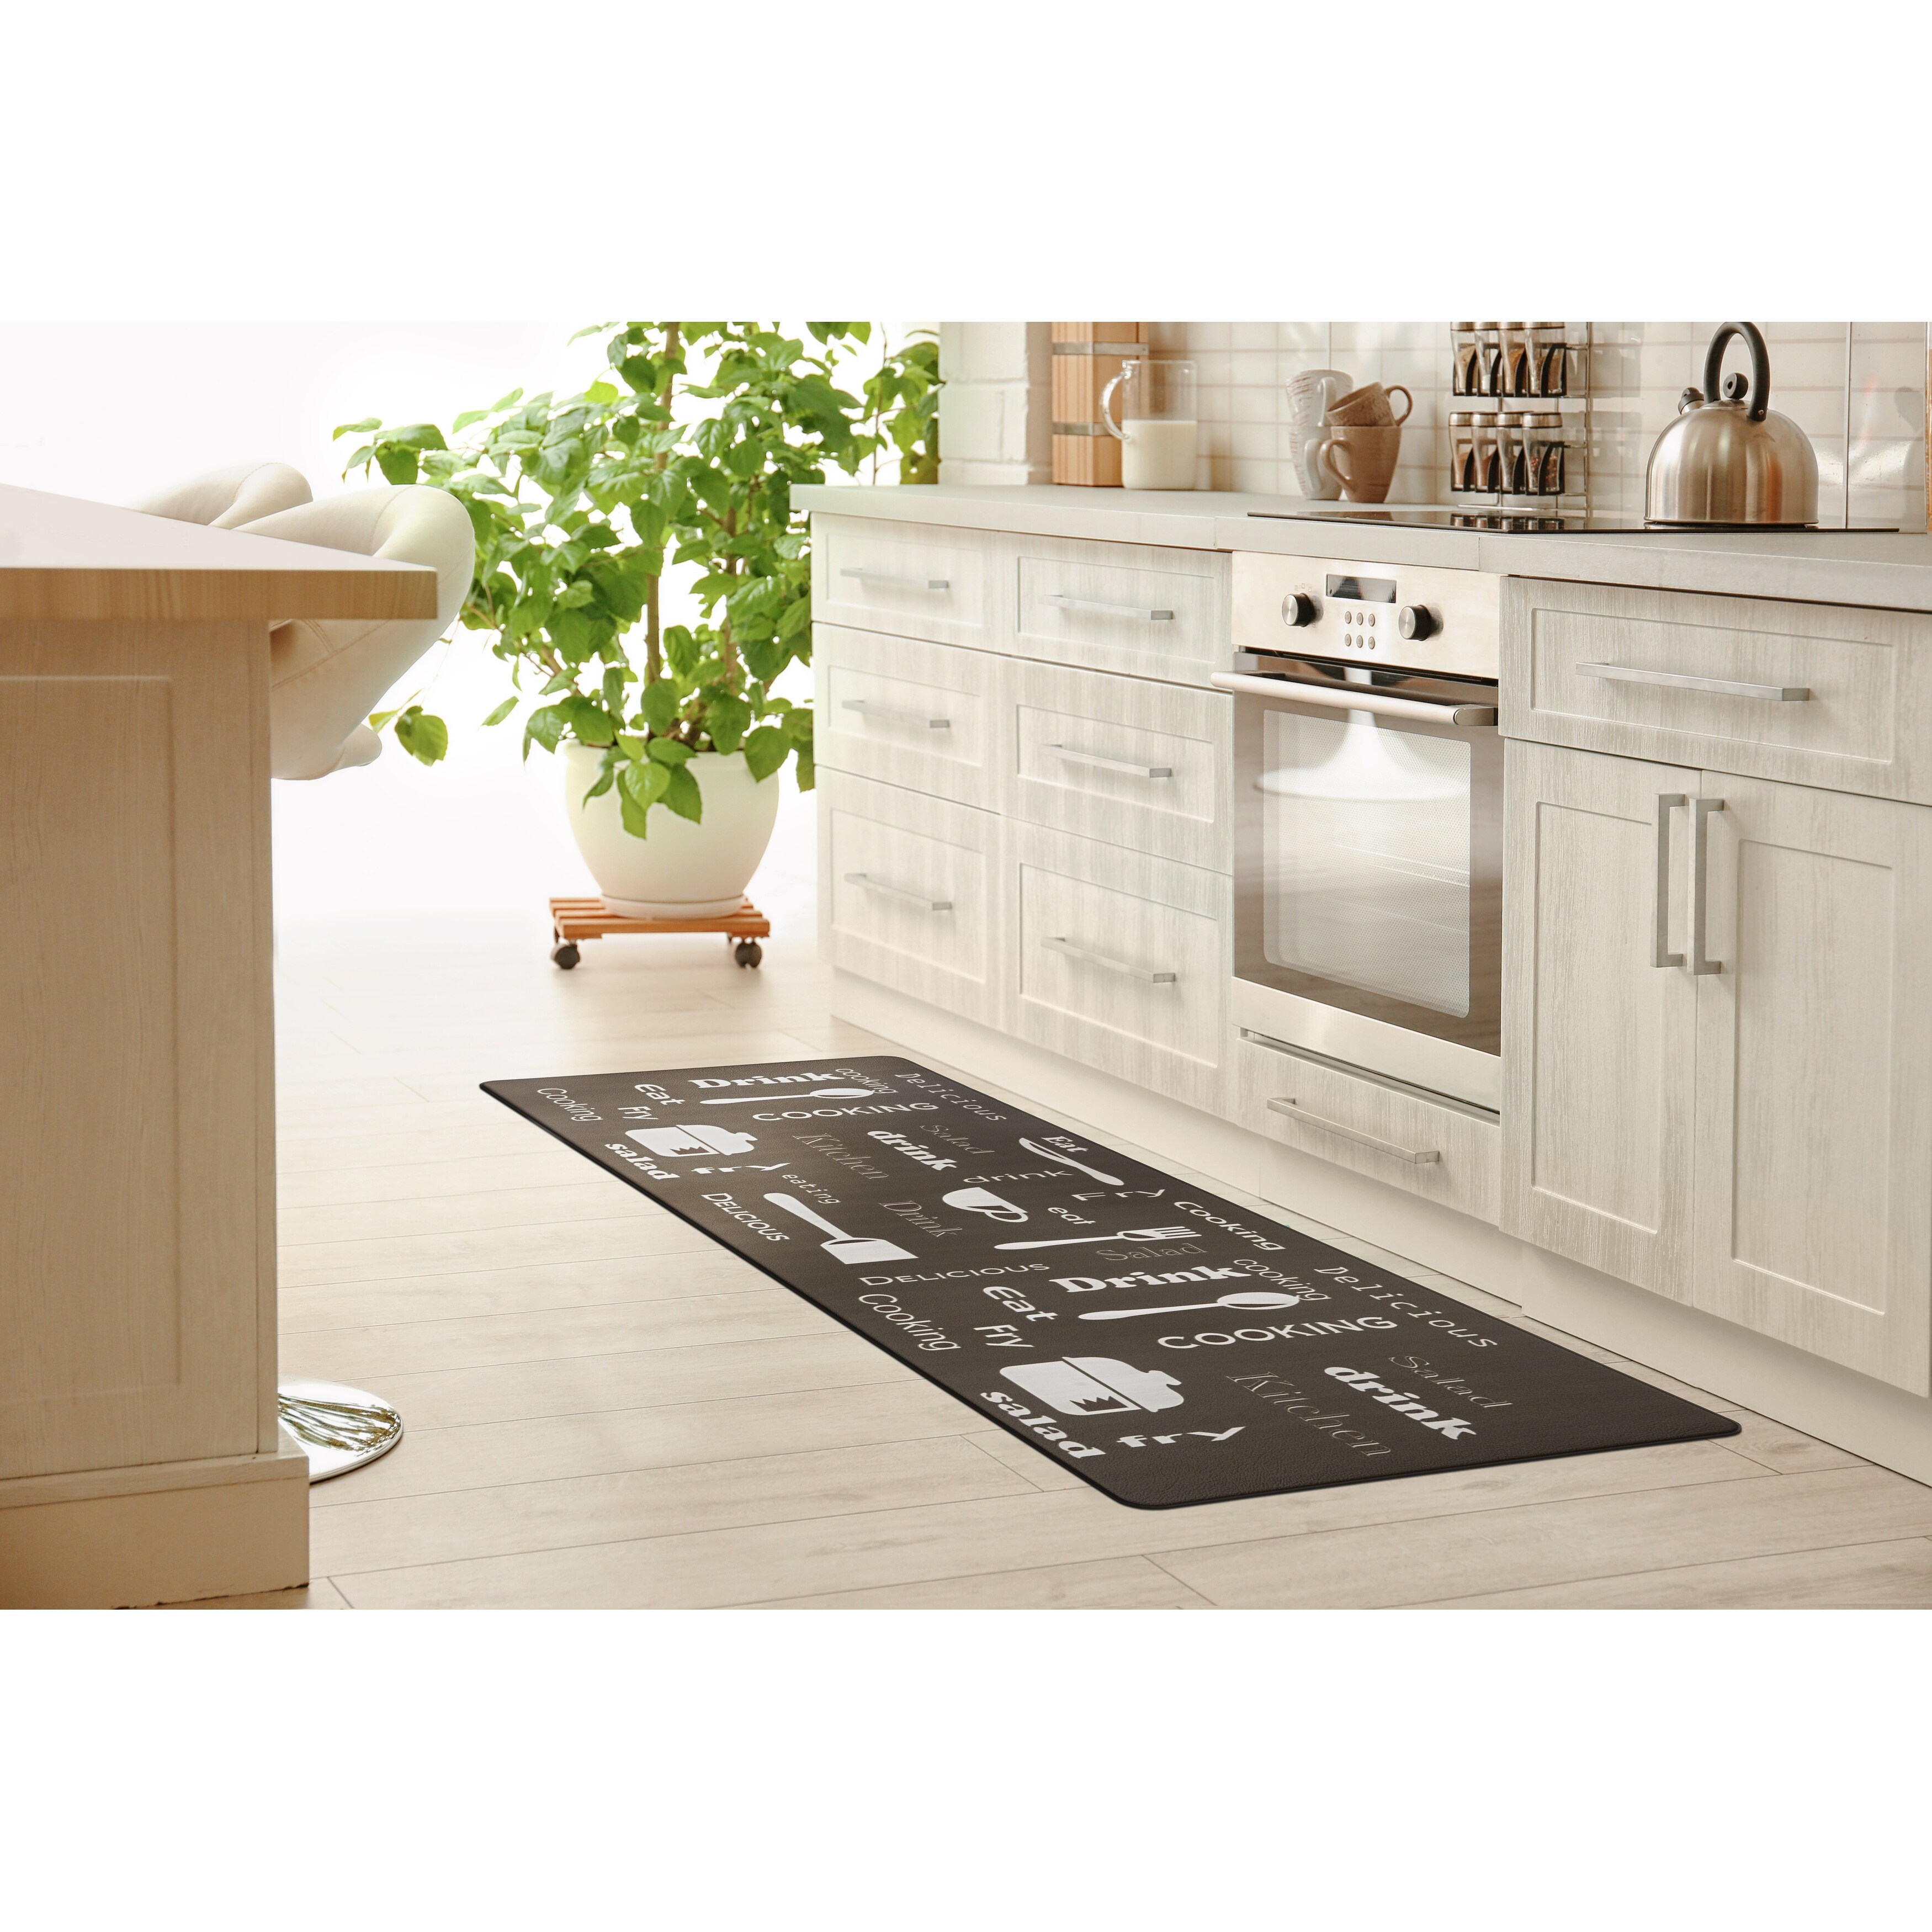 https://ak1.ostkcdn.com/images/products/is/images/direct/bf826859e8e36c7a2c5db456253ea5268f43bb52/Anti-Fatigue-Kitchen-Standing-Mat.jpg